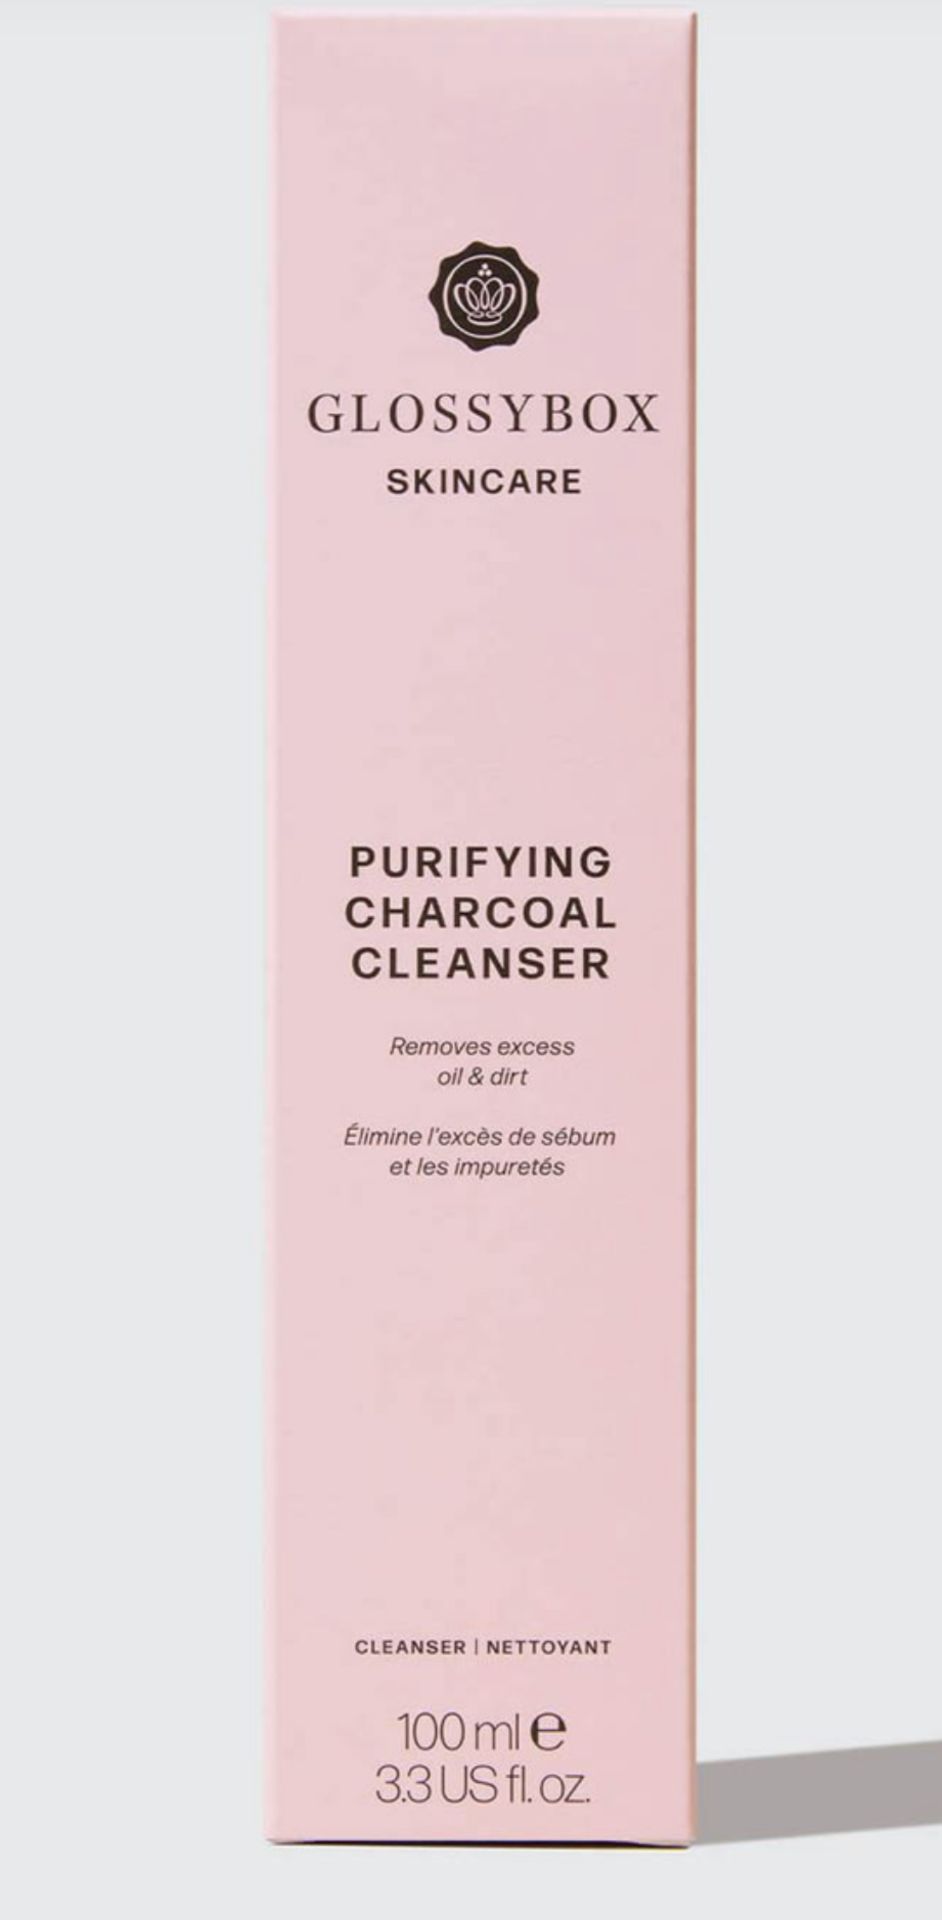 480 X GLOSSYBOX PURIFYING CHARCOAL CLEANSER RRP £6240